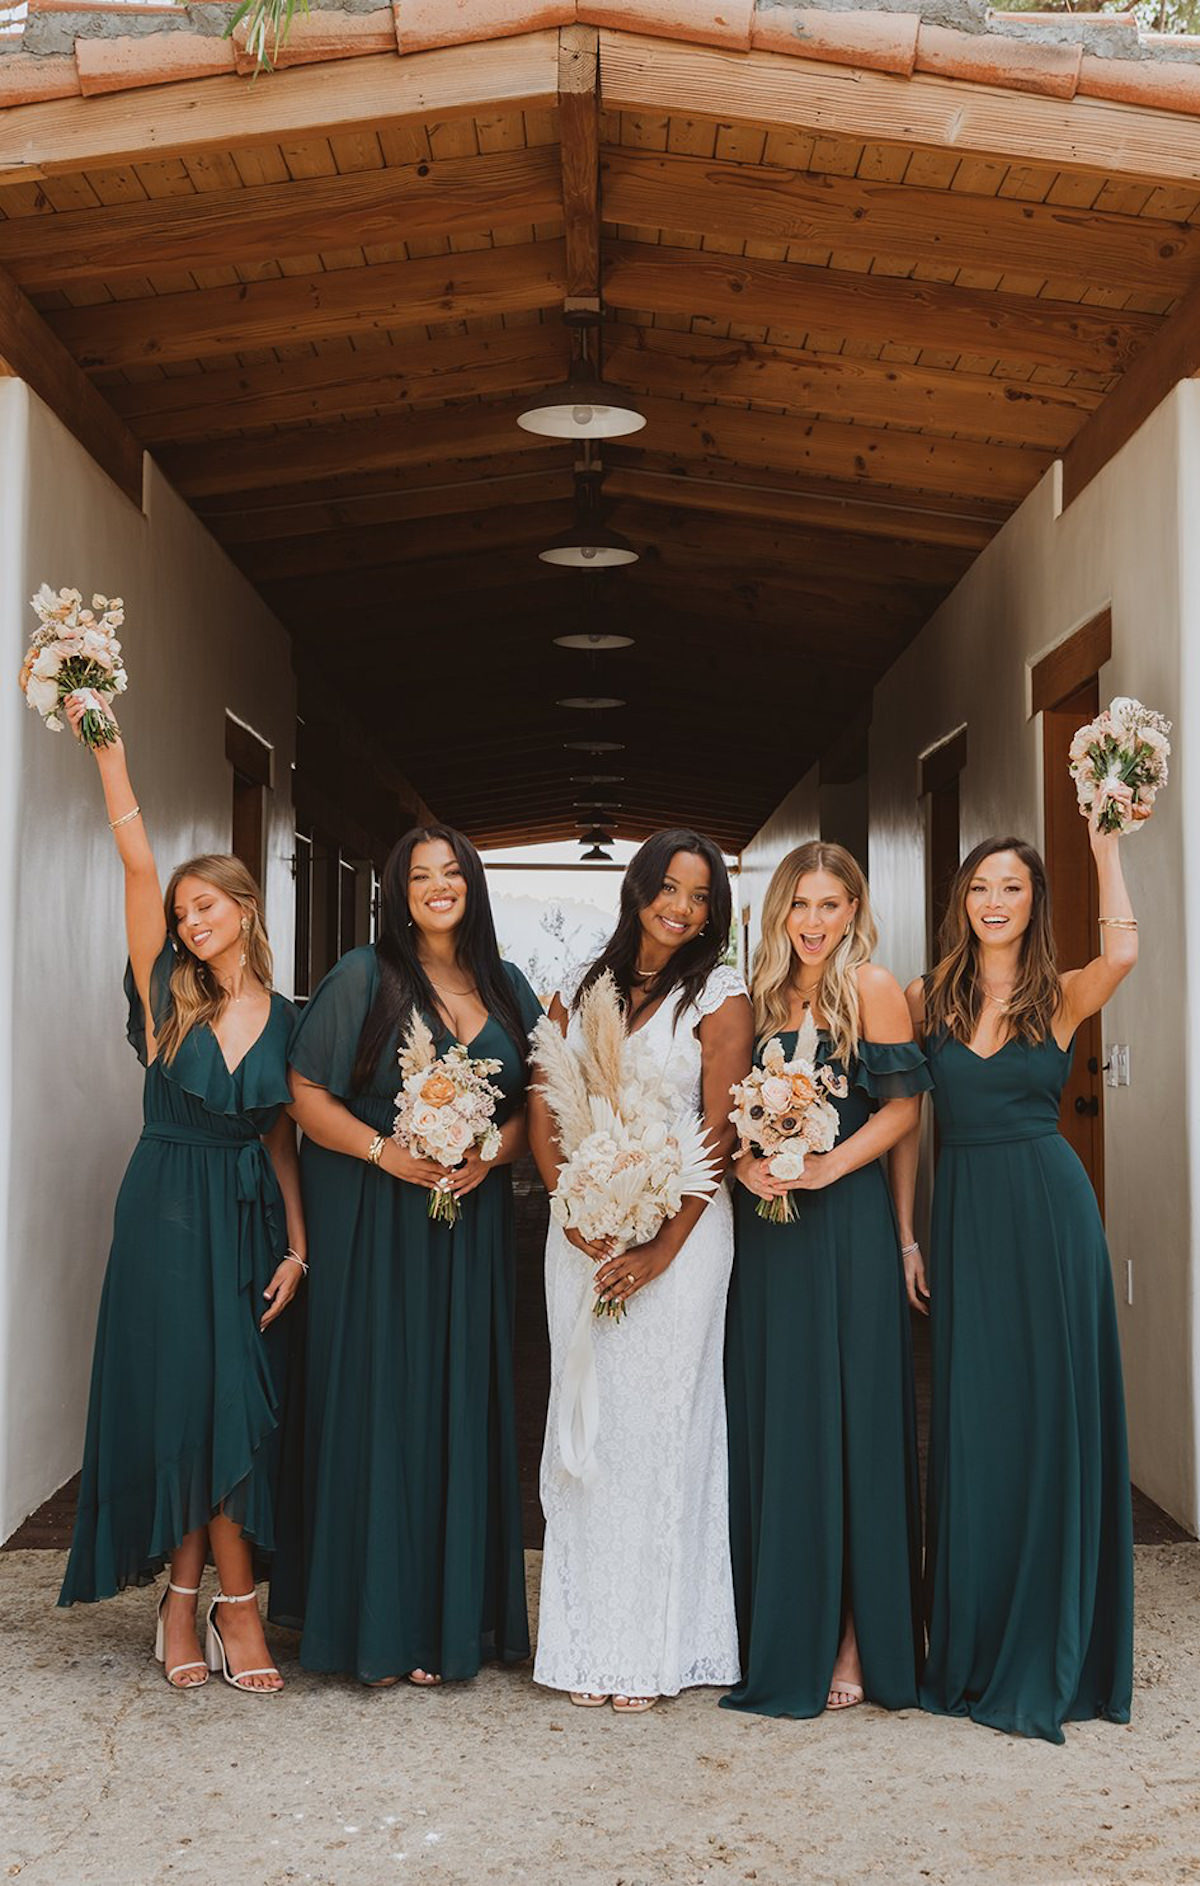 Forest Green Bridesmaid Dresses - fall wedding colors - Sow Me Your Mumu